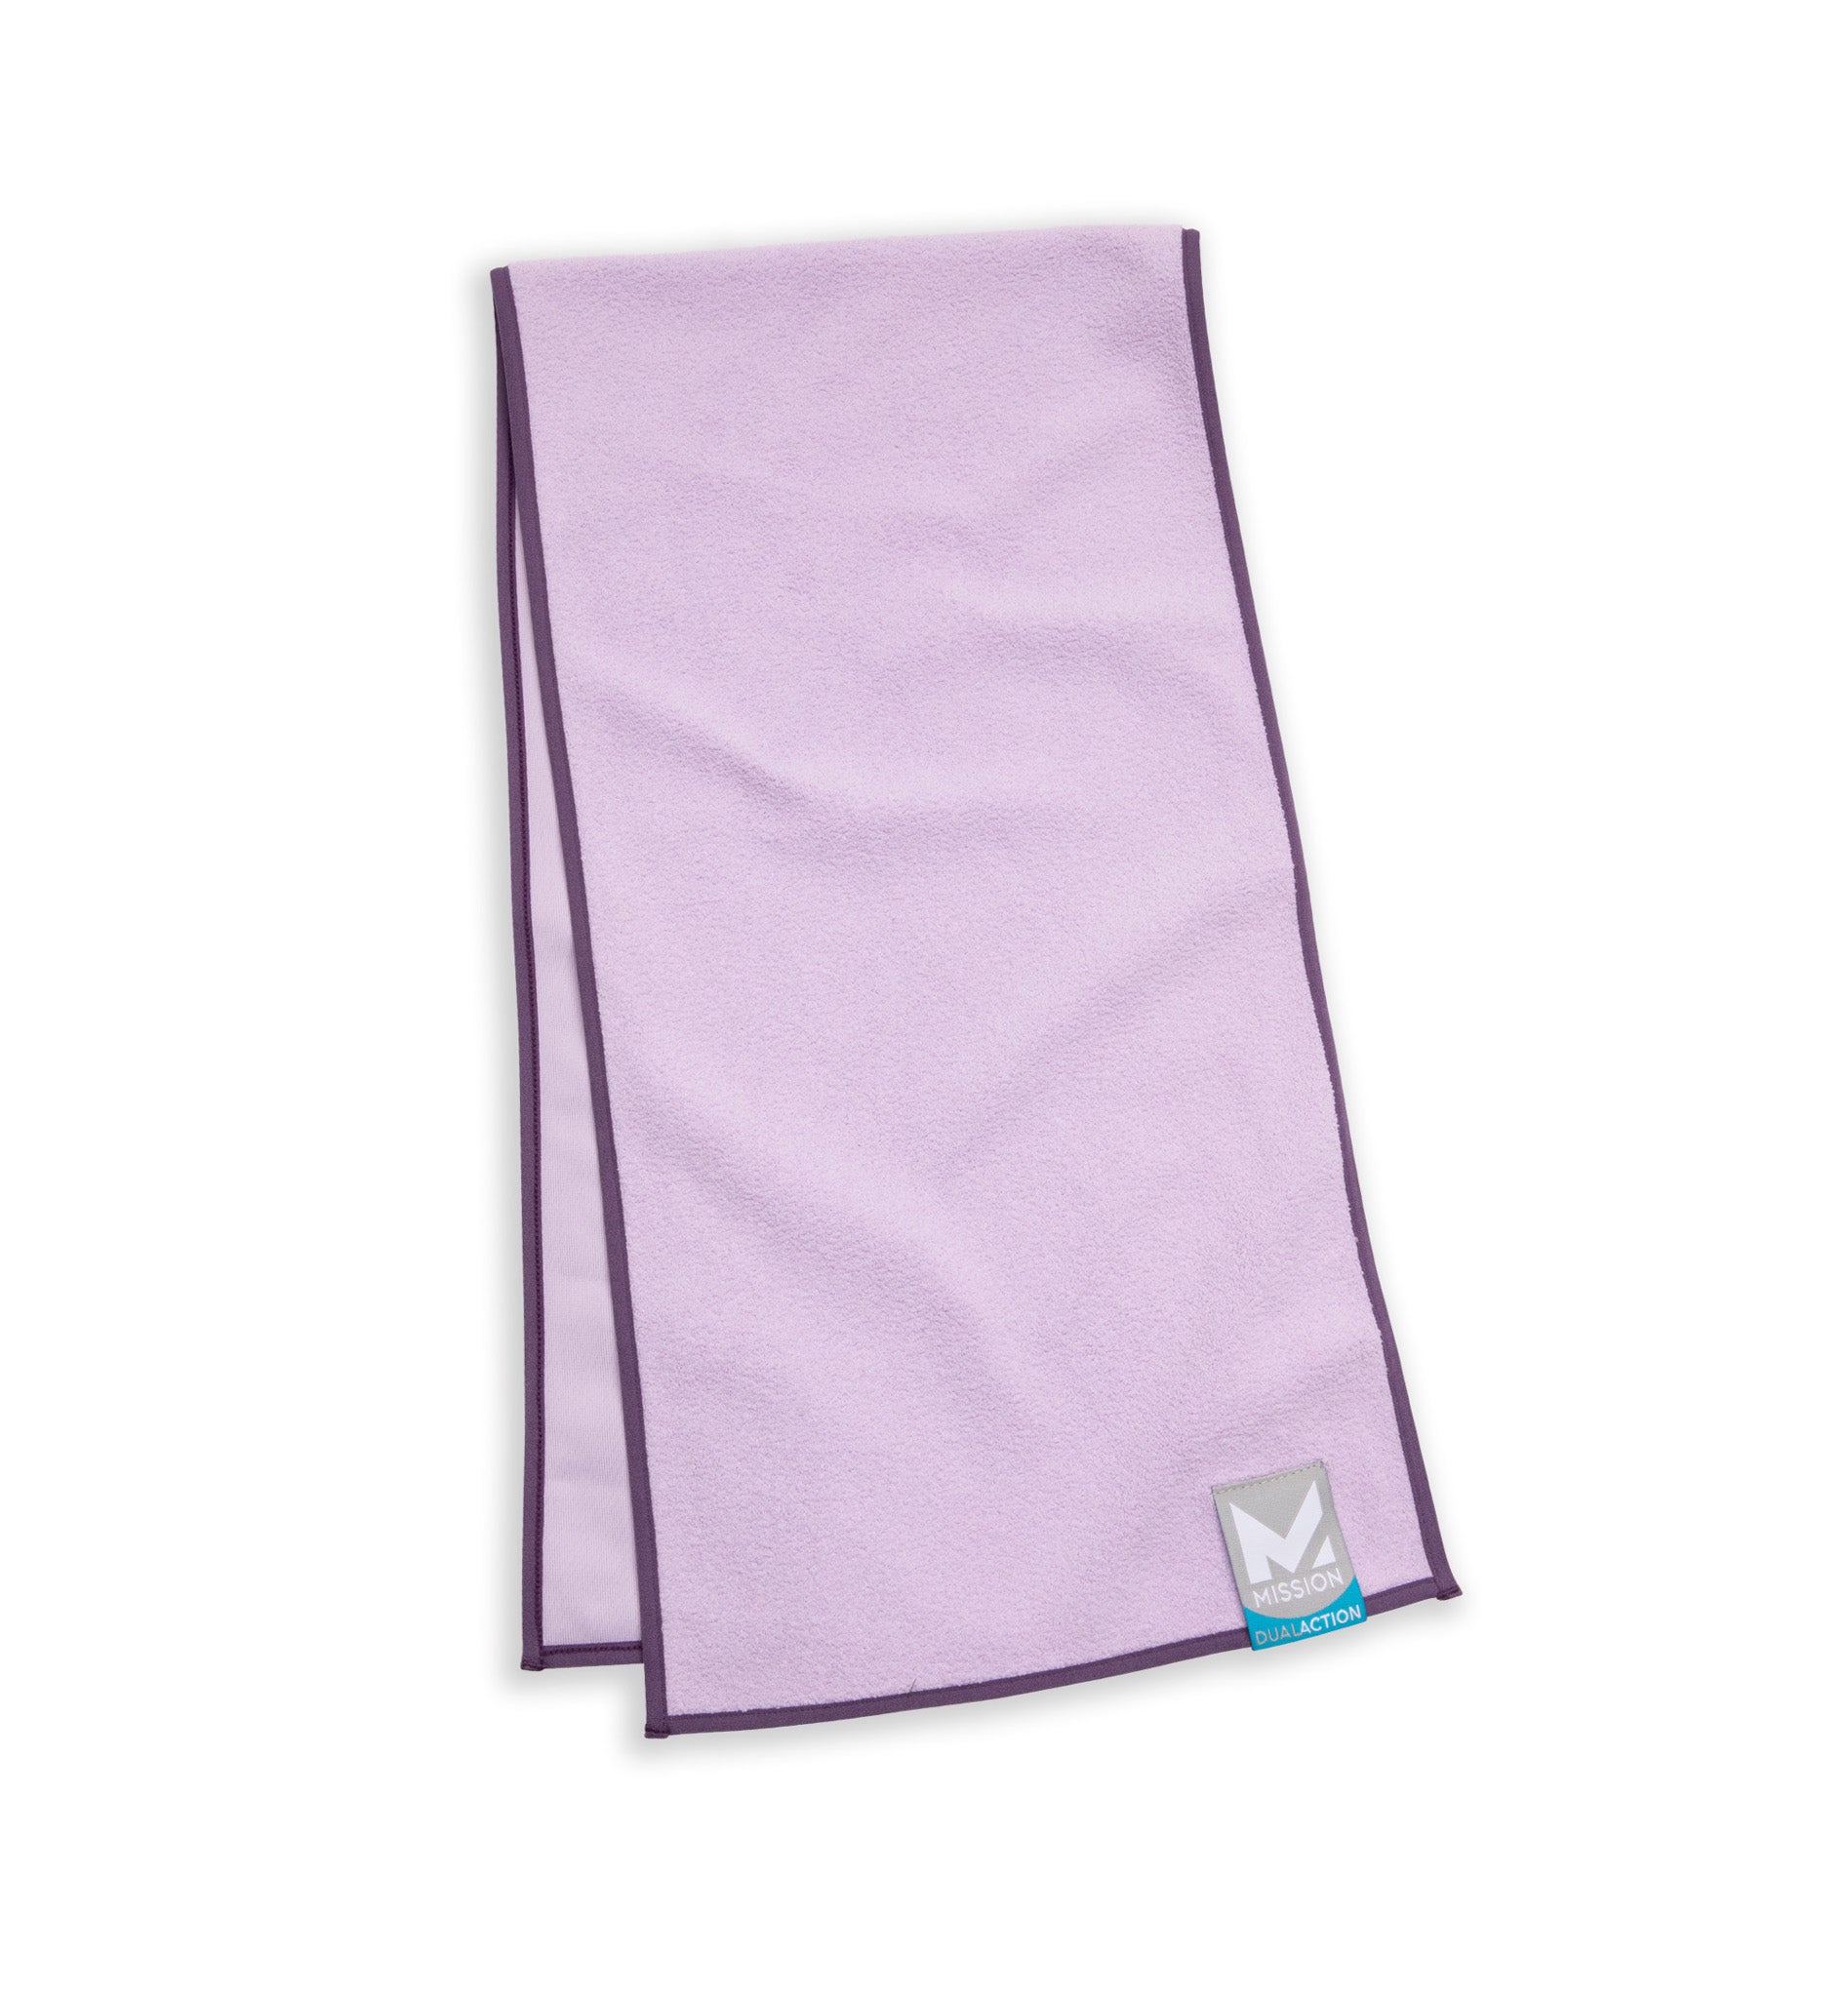 Dual Action Cooling & Drying Towel Towels MISSION One Size Lilac/Loganberry 